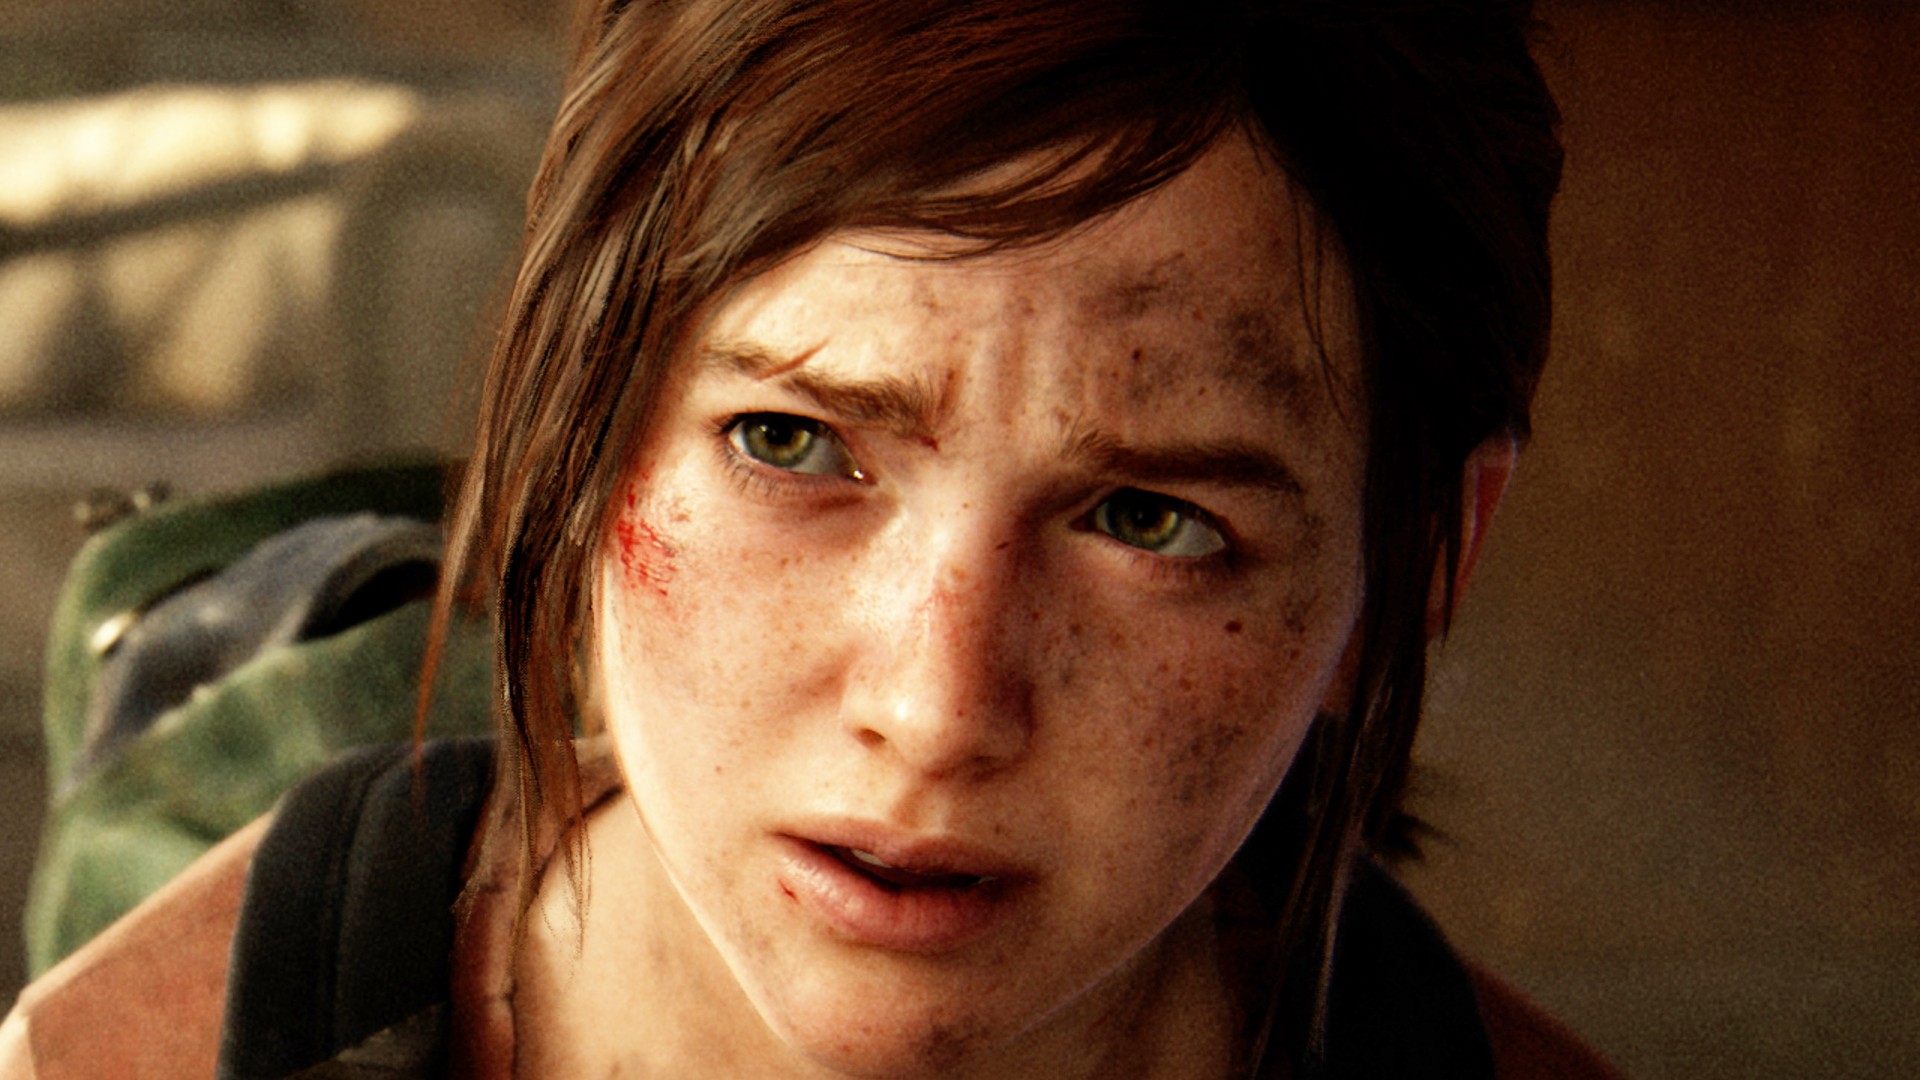 The Last of Us Part 1 is $10 Cheaper on PC